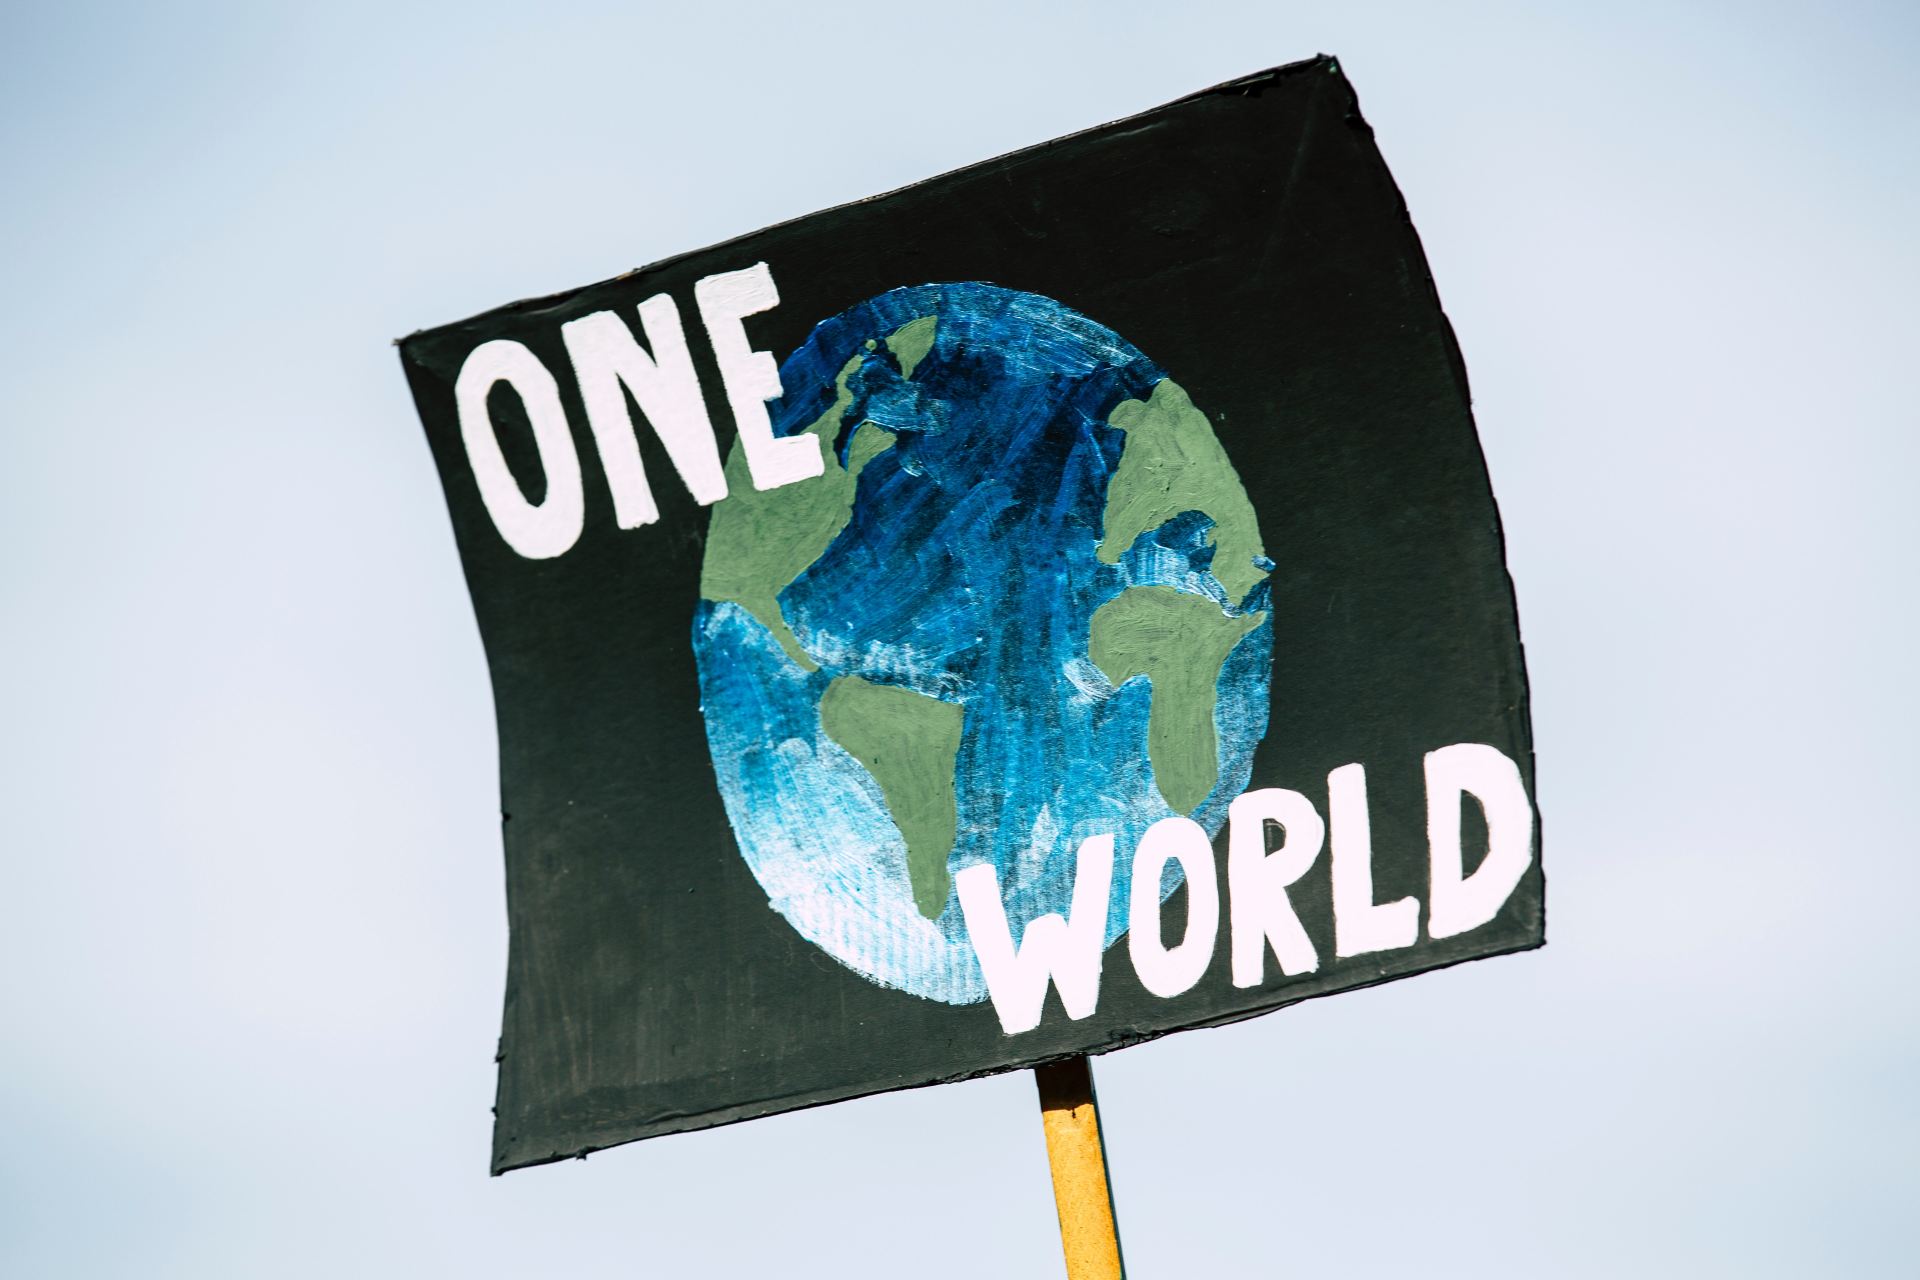 'One World' written on a sign during a protest with the Earth in the background.